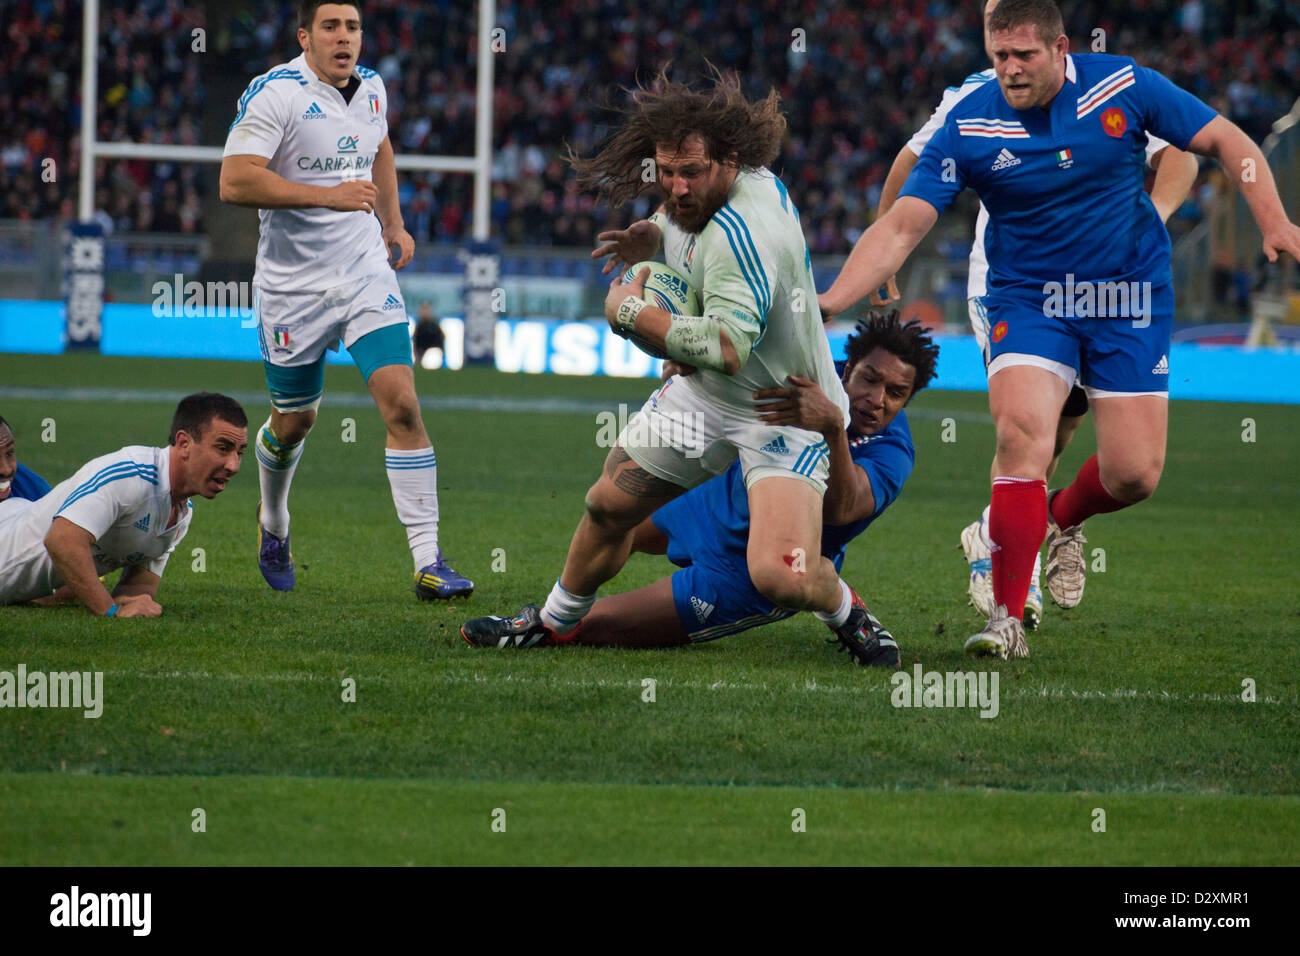 February 3rd 2013. Rome, Italy. Six Nations rugby. Italy vs France. Martin Castrogiovanni scores in the 57th minute after receiving the ball from Luciano Orquera (lying on ground). Stock Photo